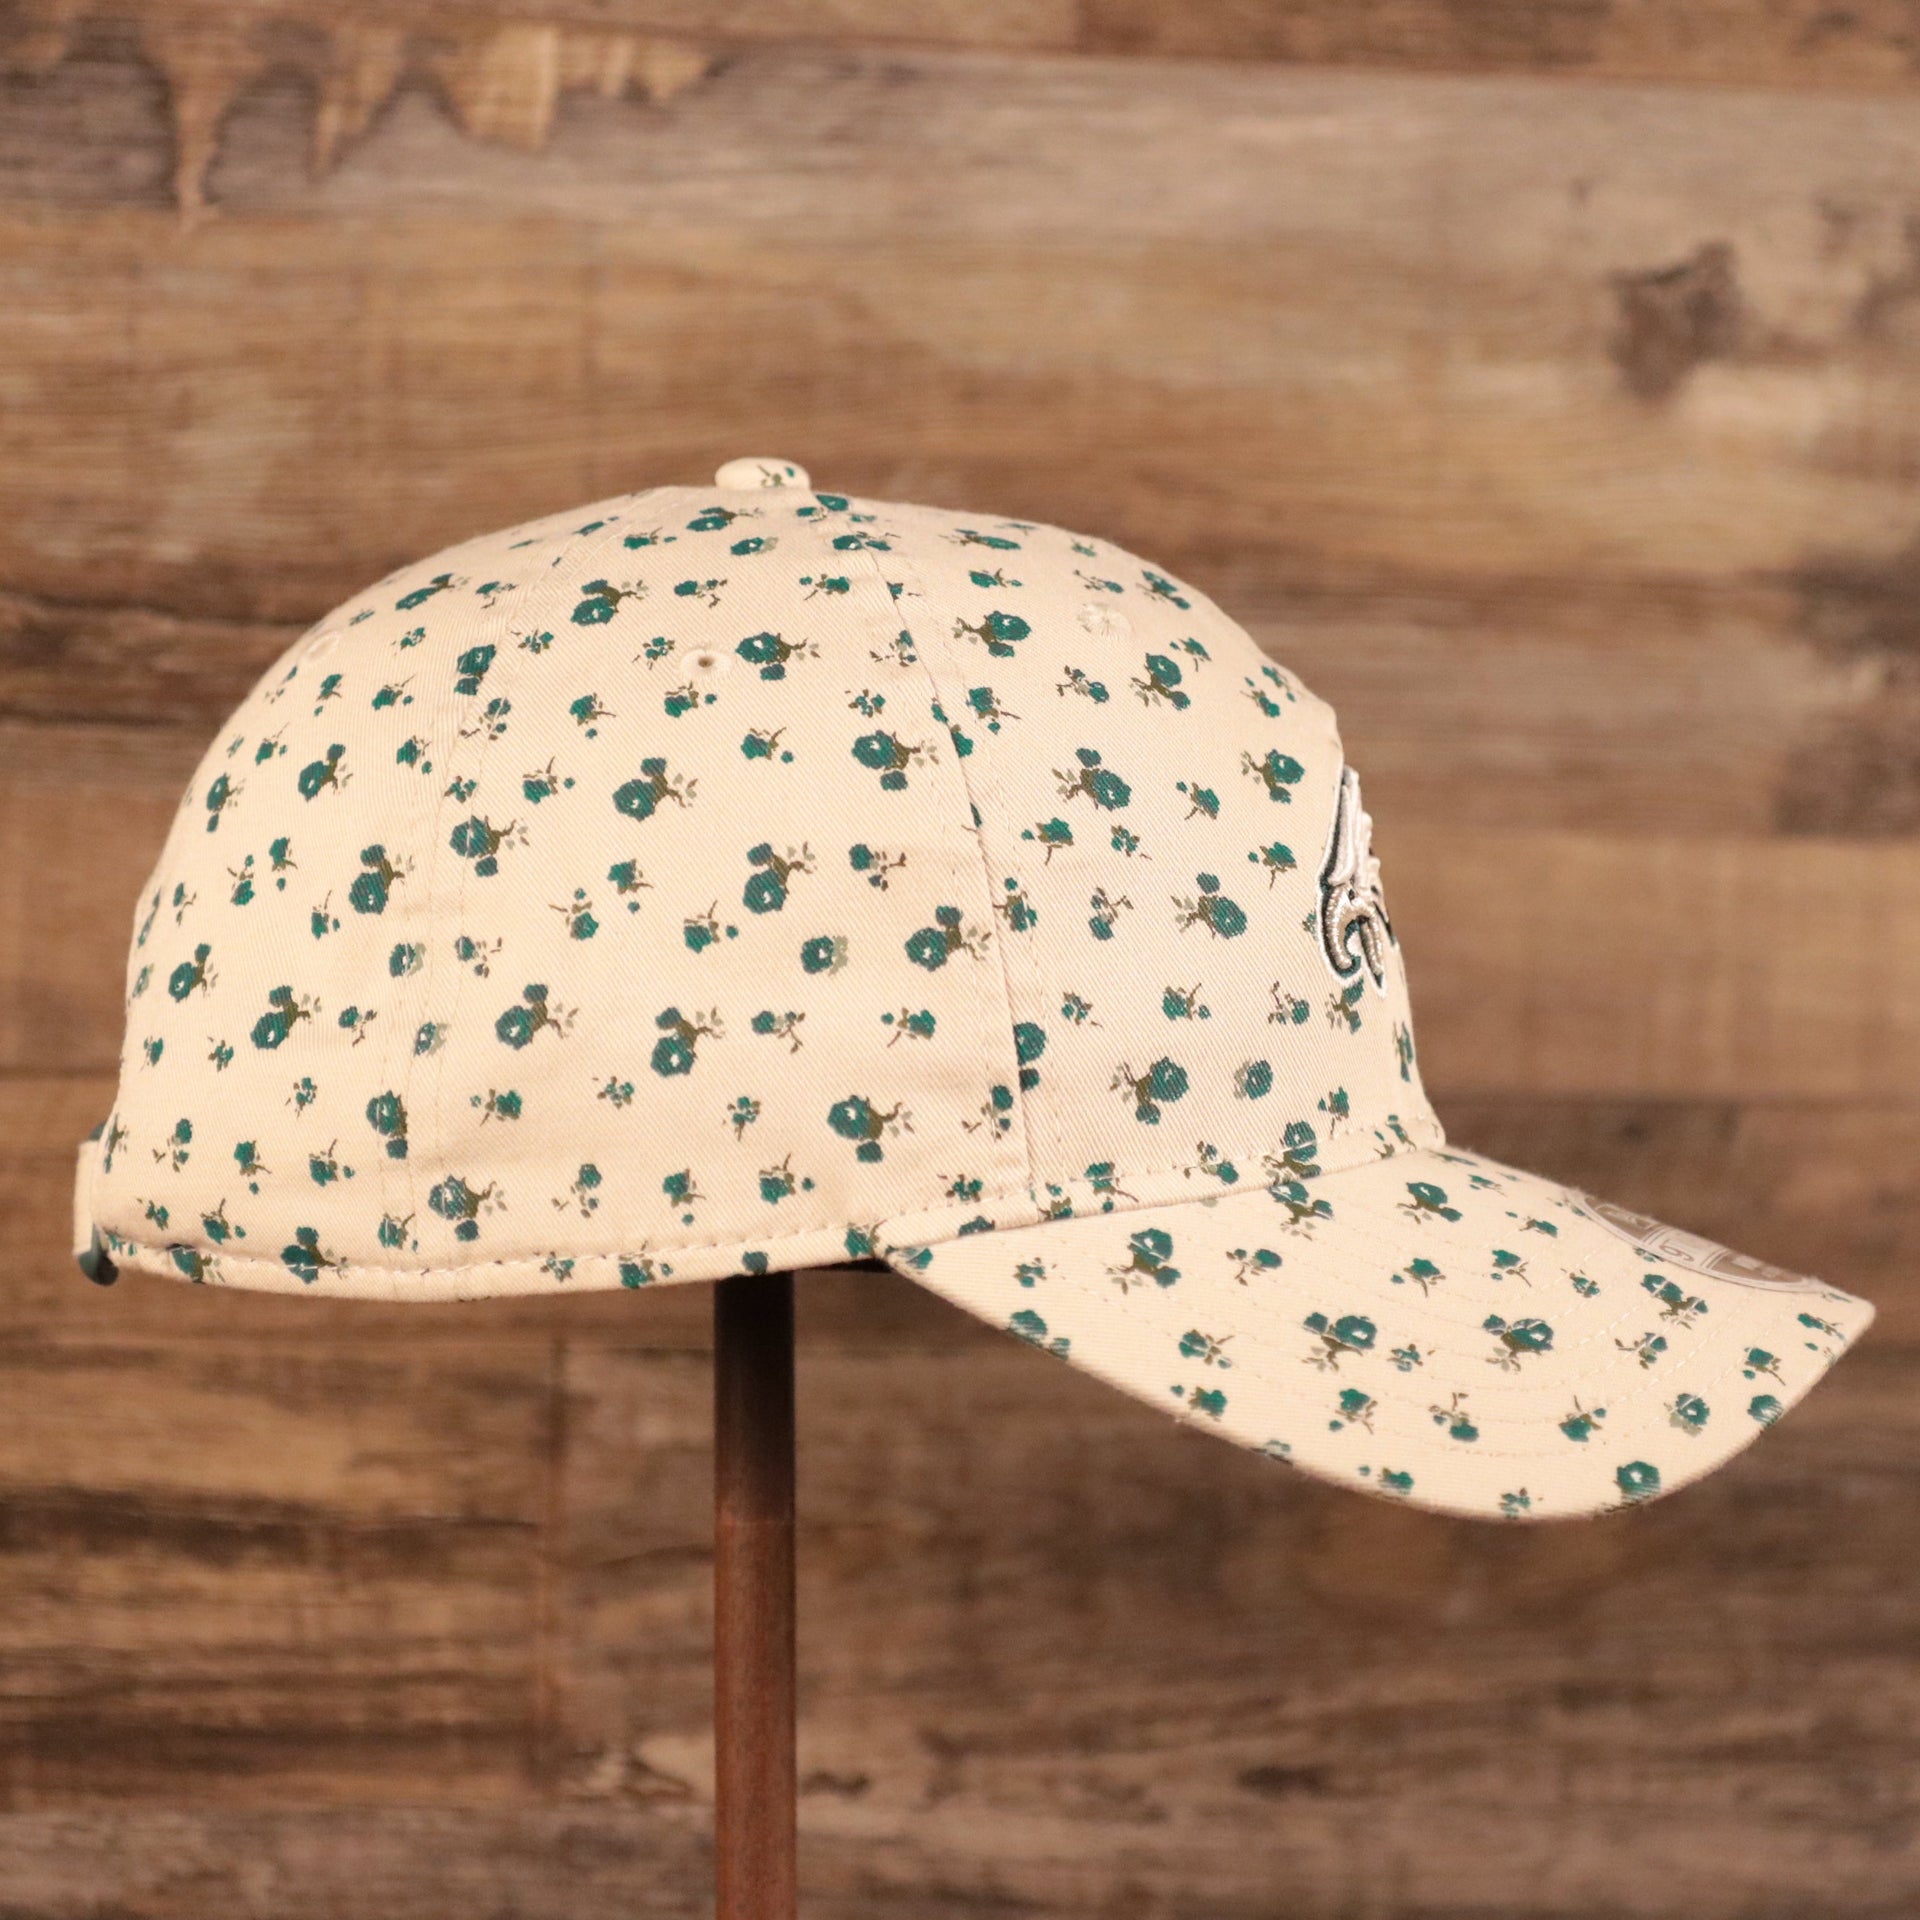 The right side of the cream Philadelphia Eagles youth floral baseball cap.